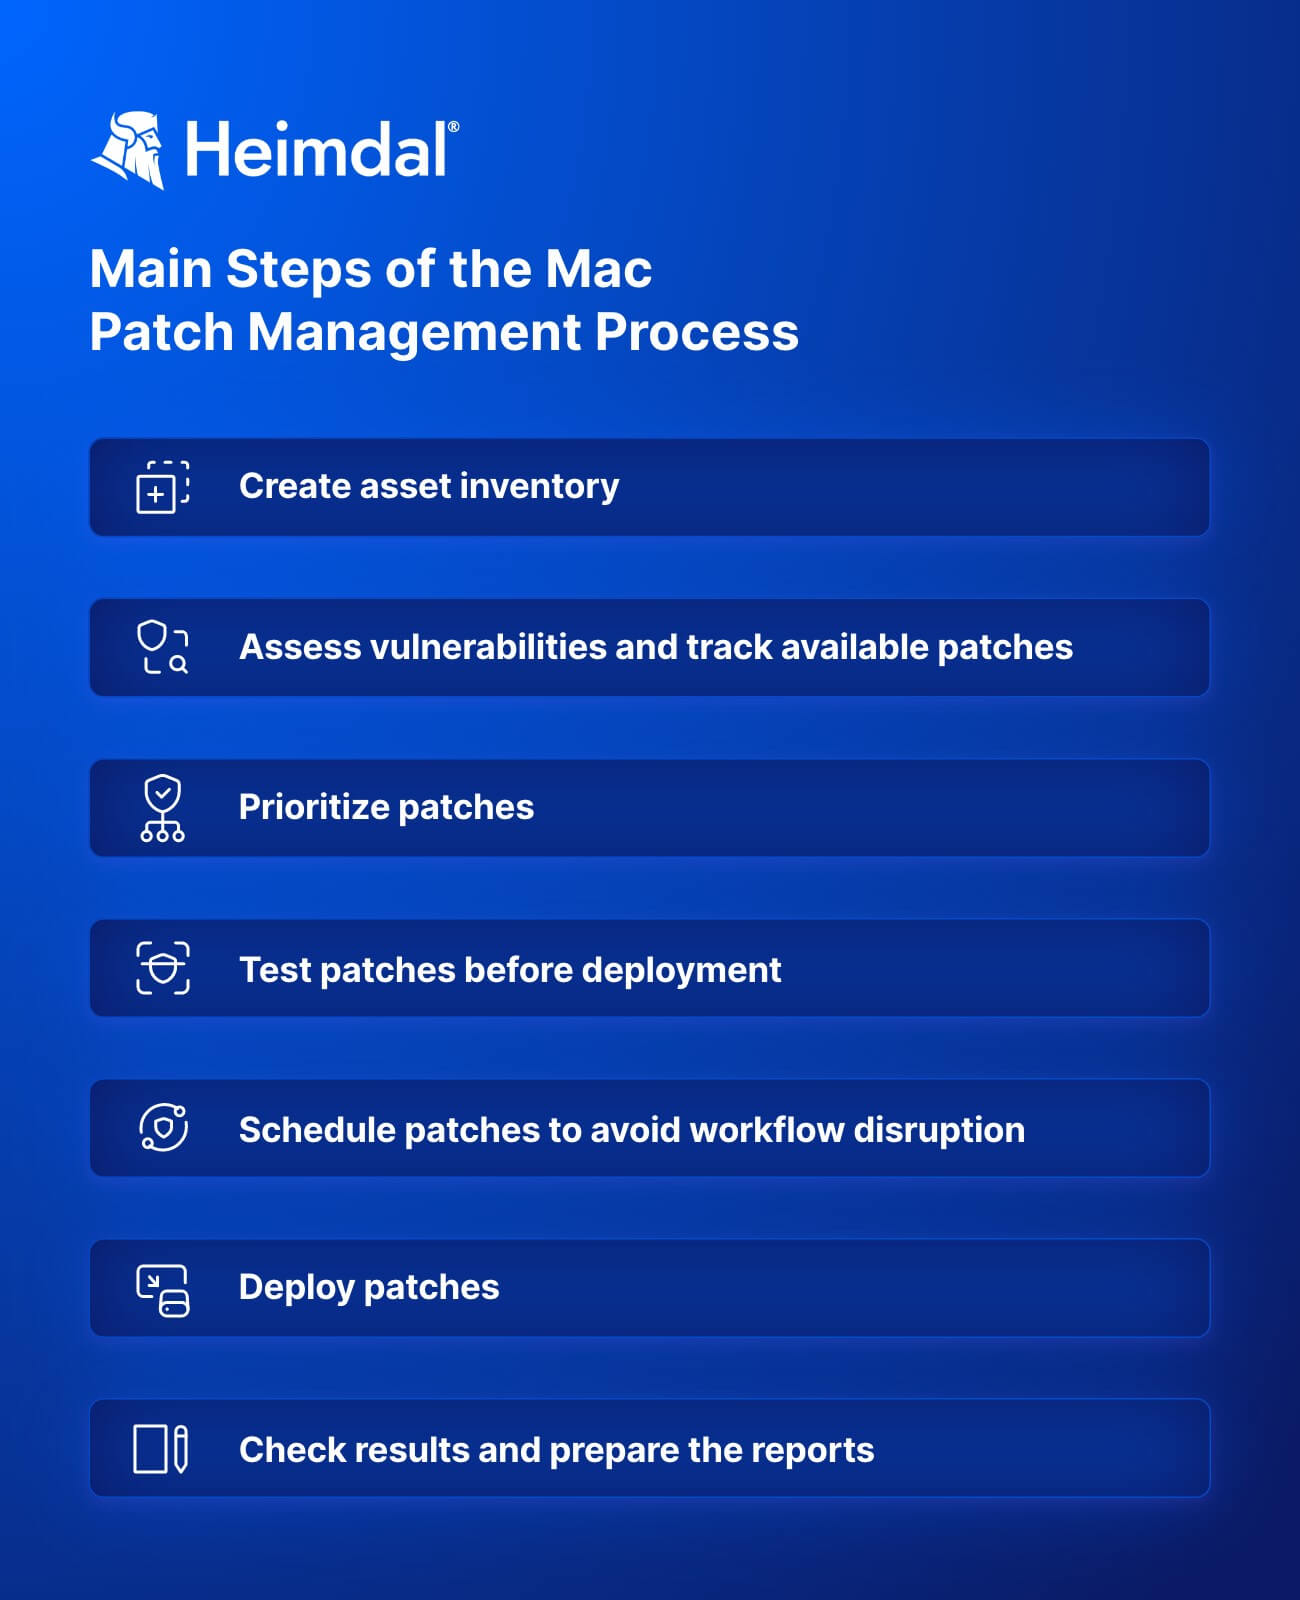 Main Steps of the Mac Patch Management Process